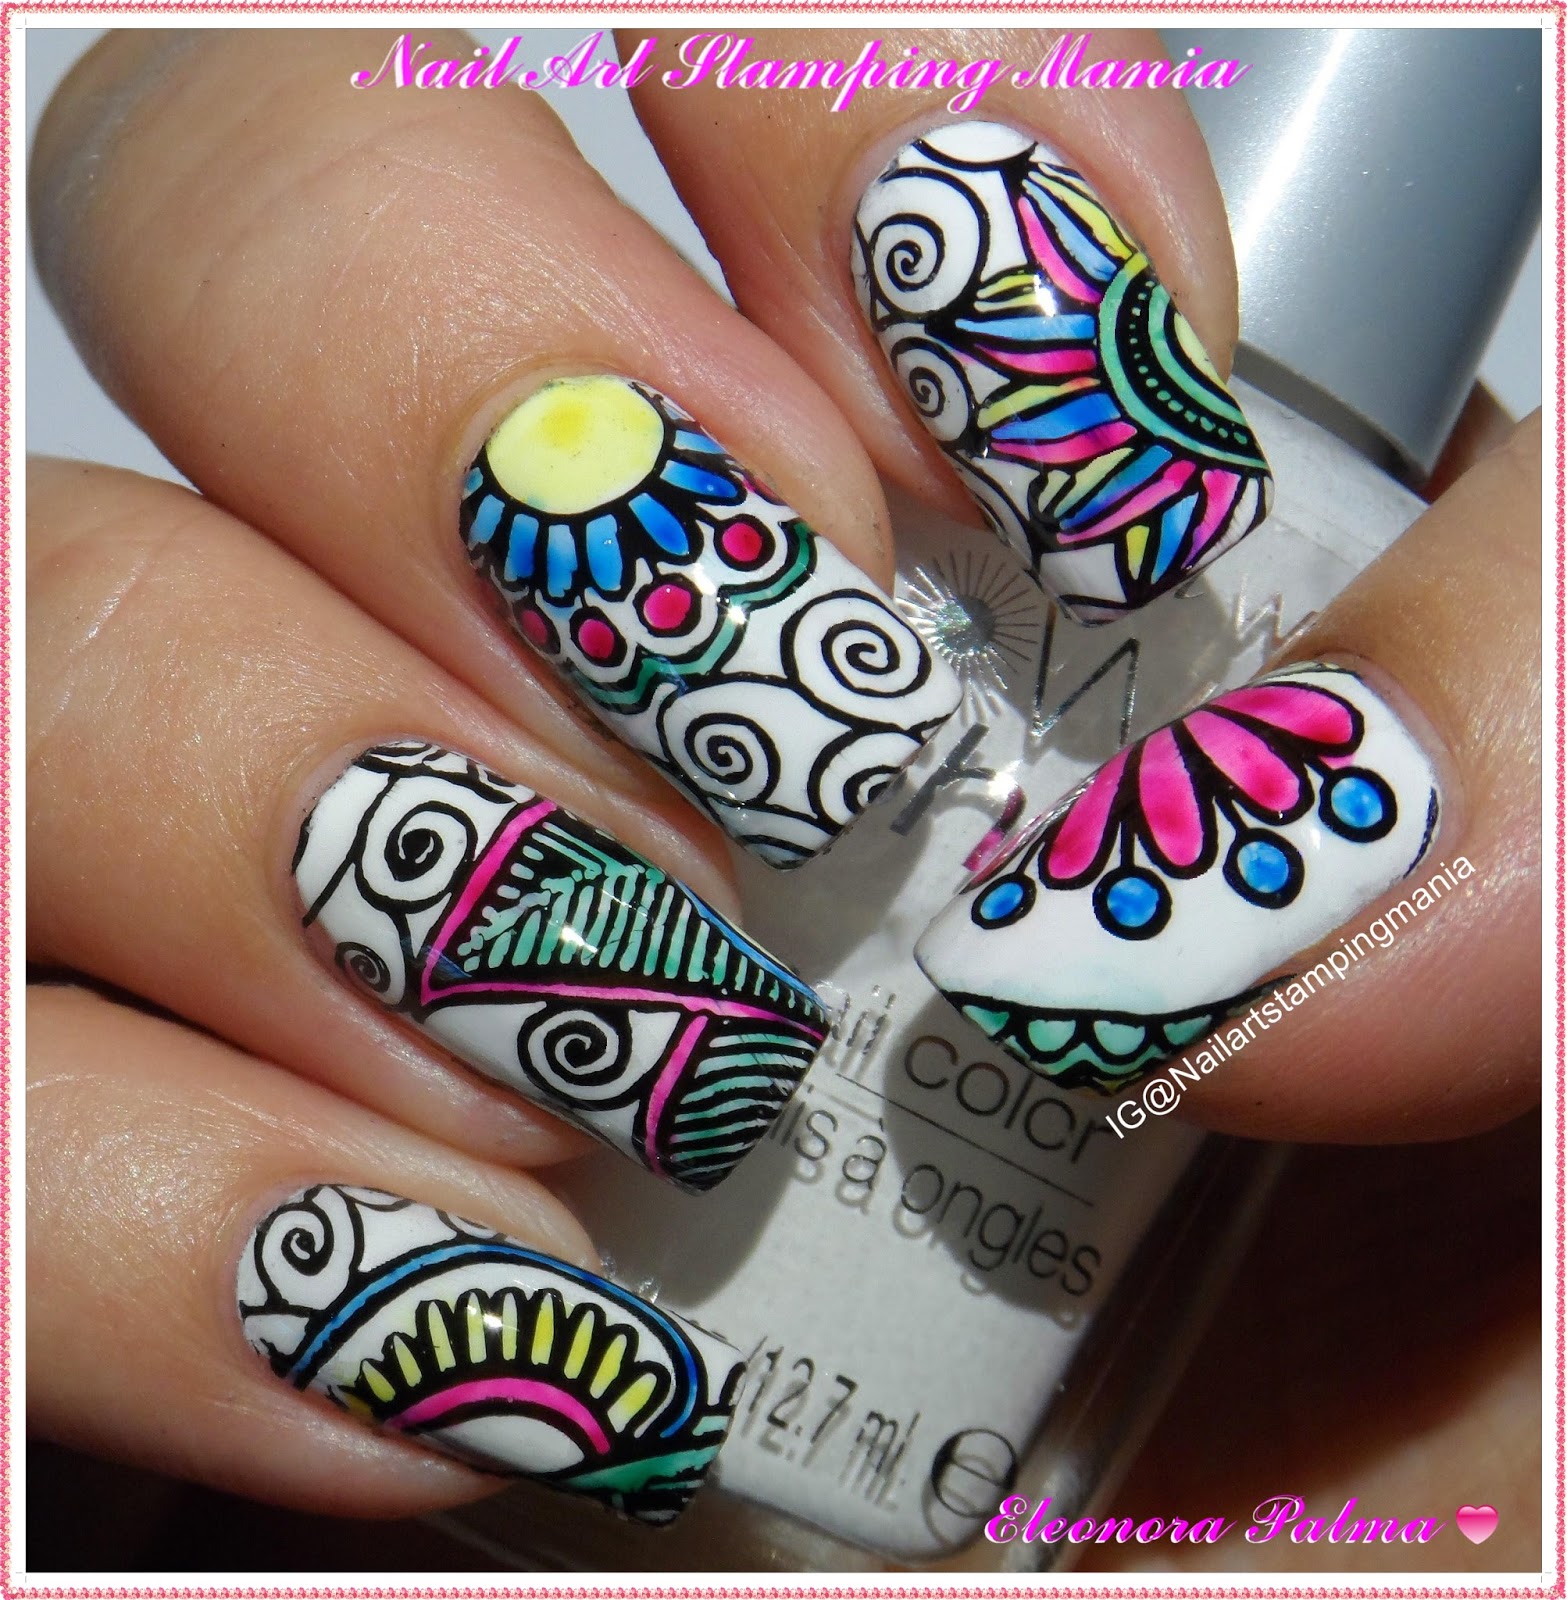 Nail Art Stamping Mania: LeadLight Manicure With Refill Stamper Heads ...